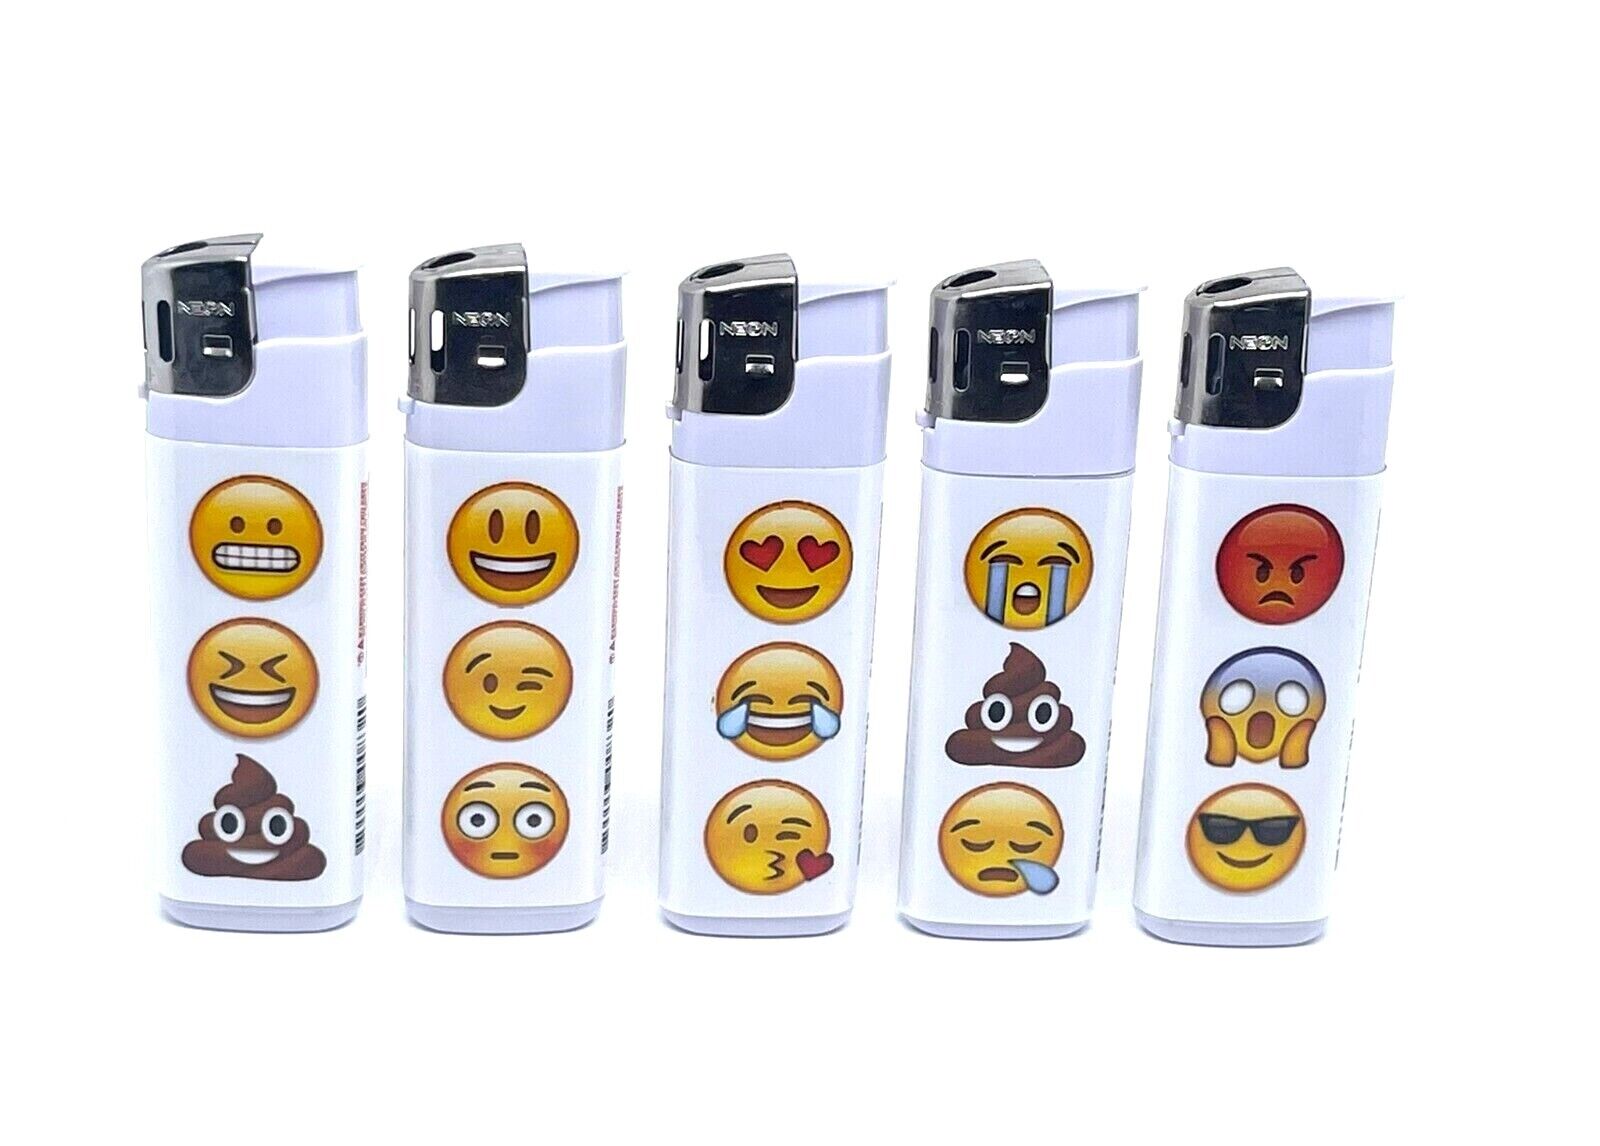 5x Emoji Neon Electronic Disposable Lighters, (5 Lighters)